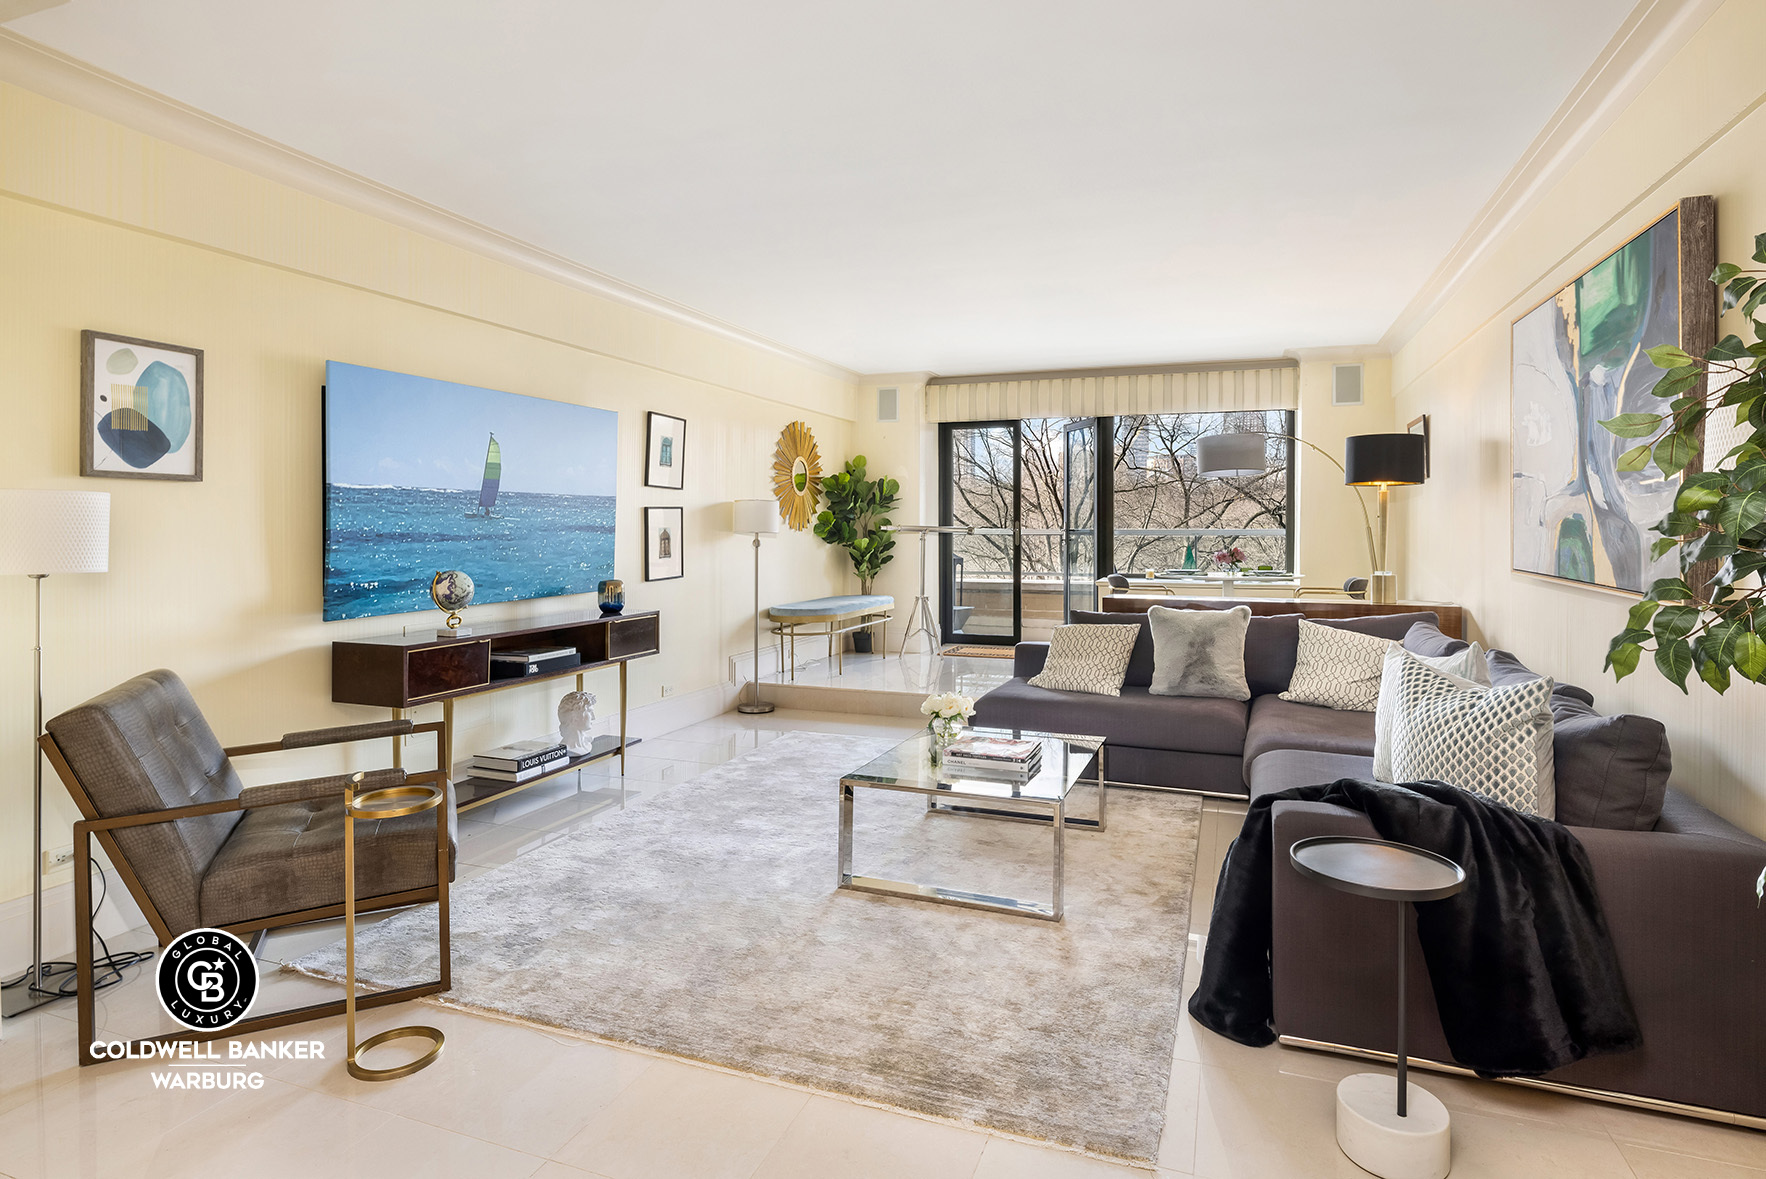 860 Fifth Avenue 7H, Lenox Hill, Upper East Side, NYC - 2 Bedrooms  
3 Bathrooms  
6 Rooms - 